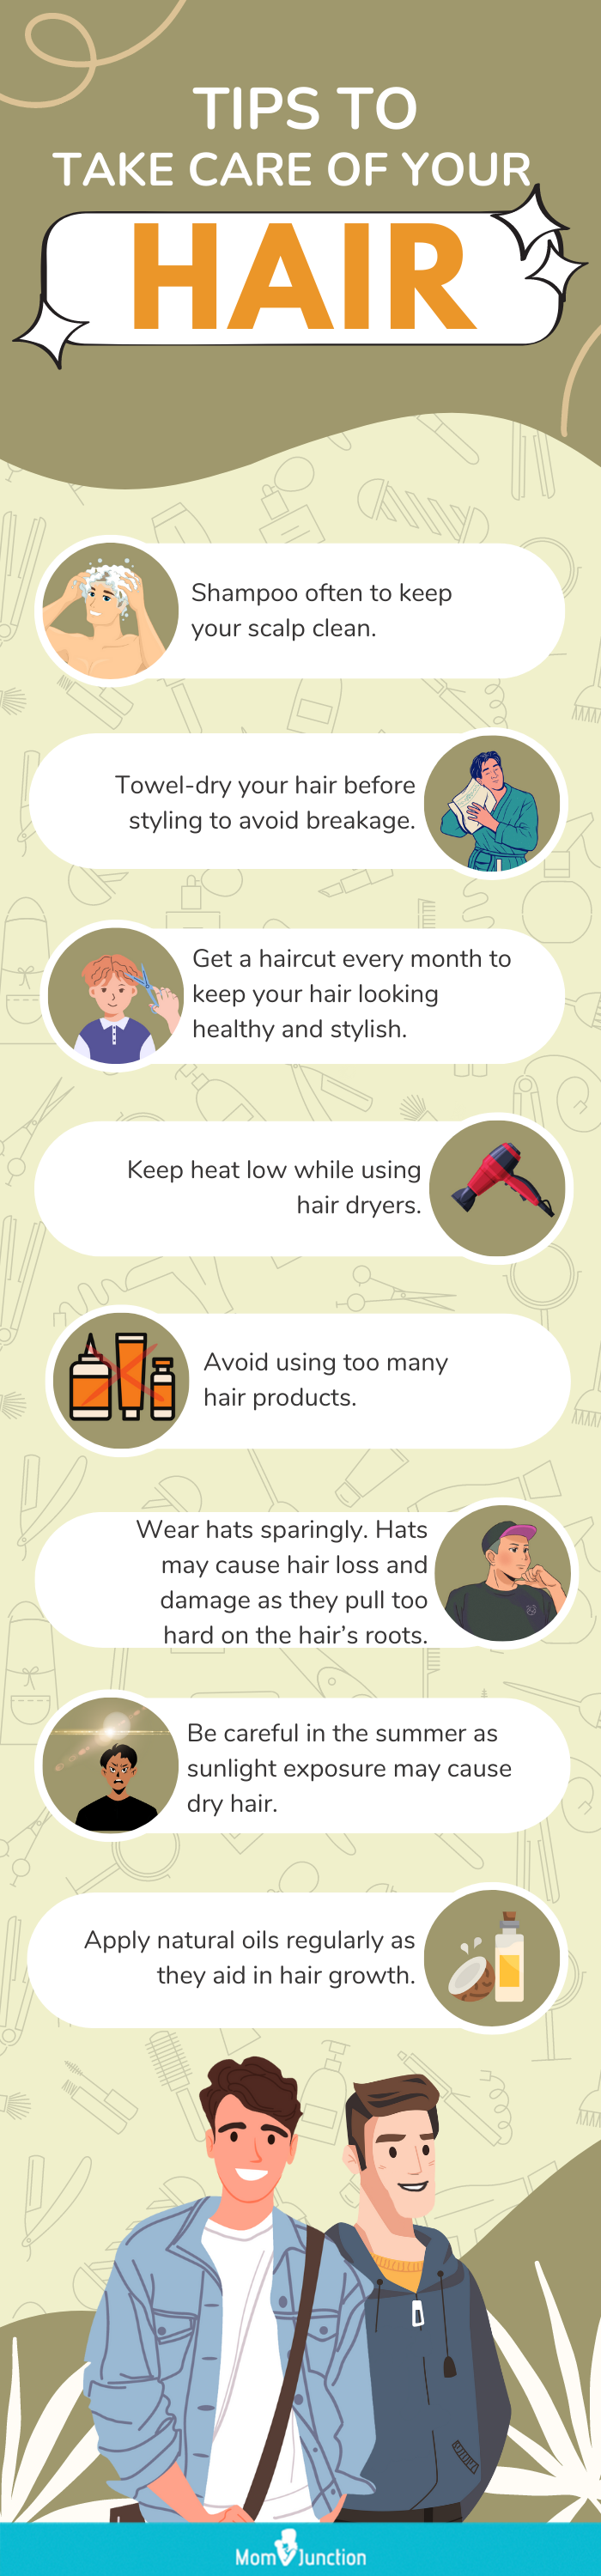 hair care tips for boys (infographic)